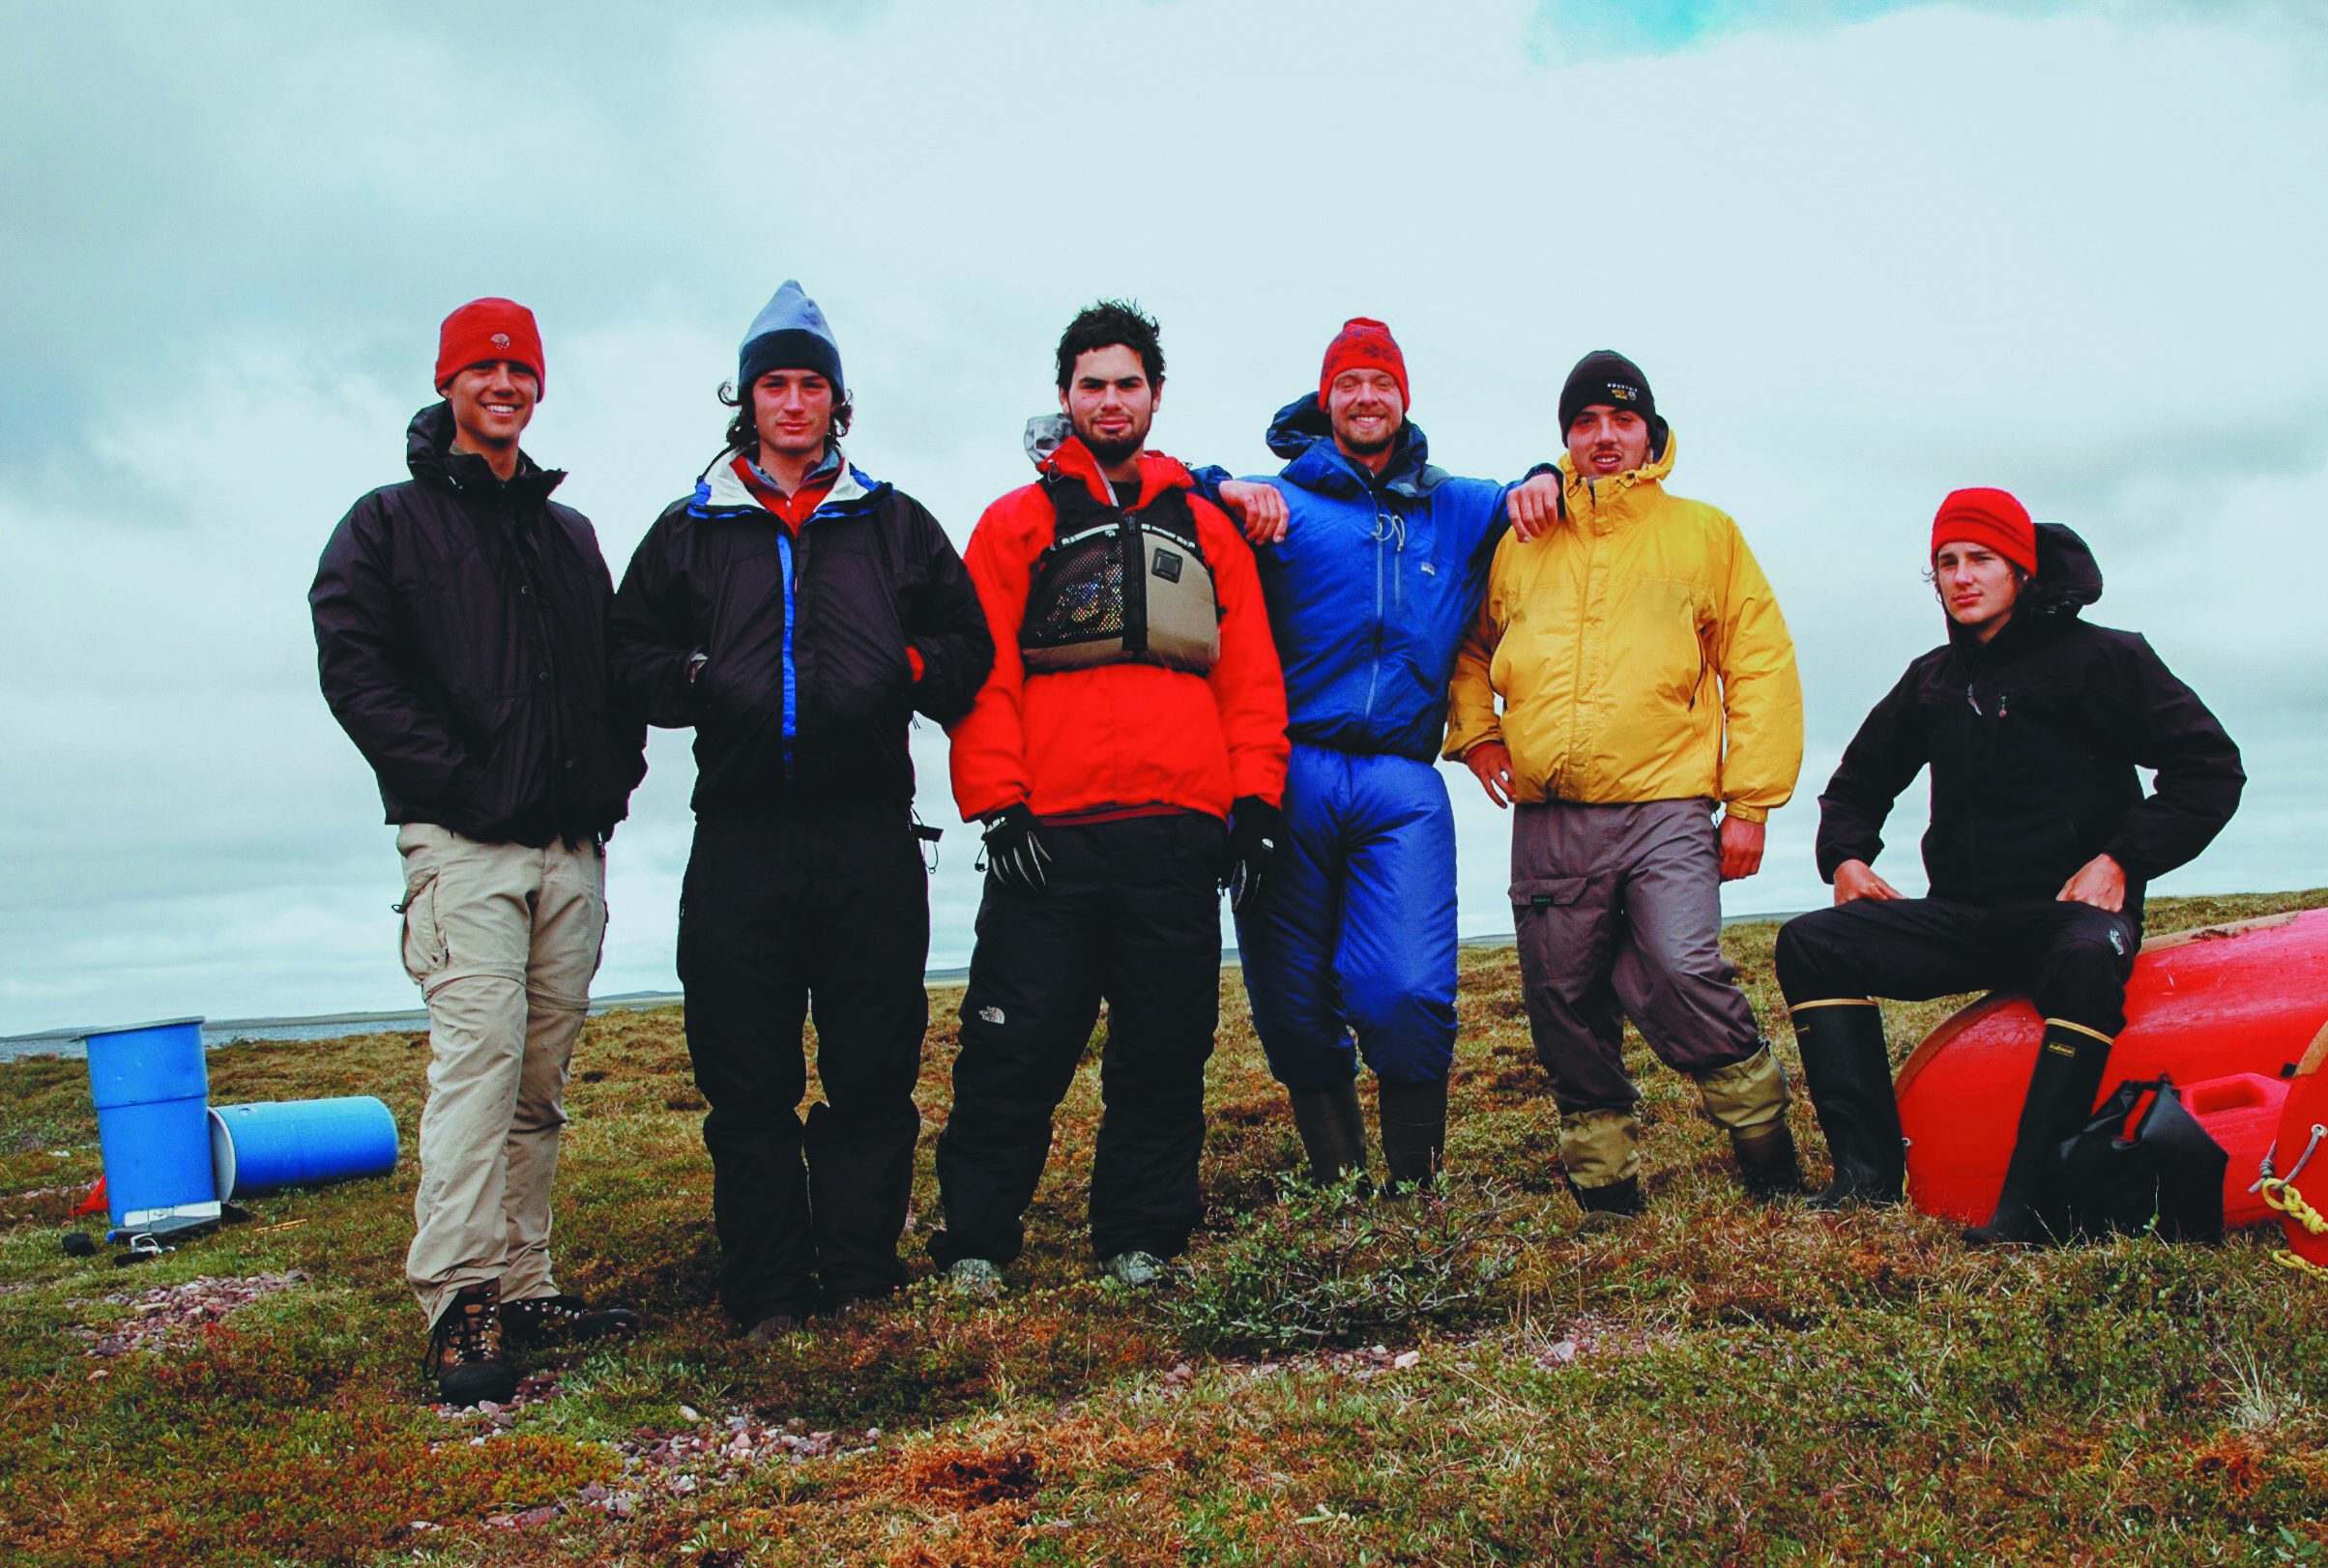 Alex Messenger, left, posed for a self-portrait with members of his party during their trek in 2005.